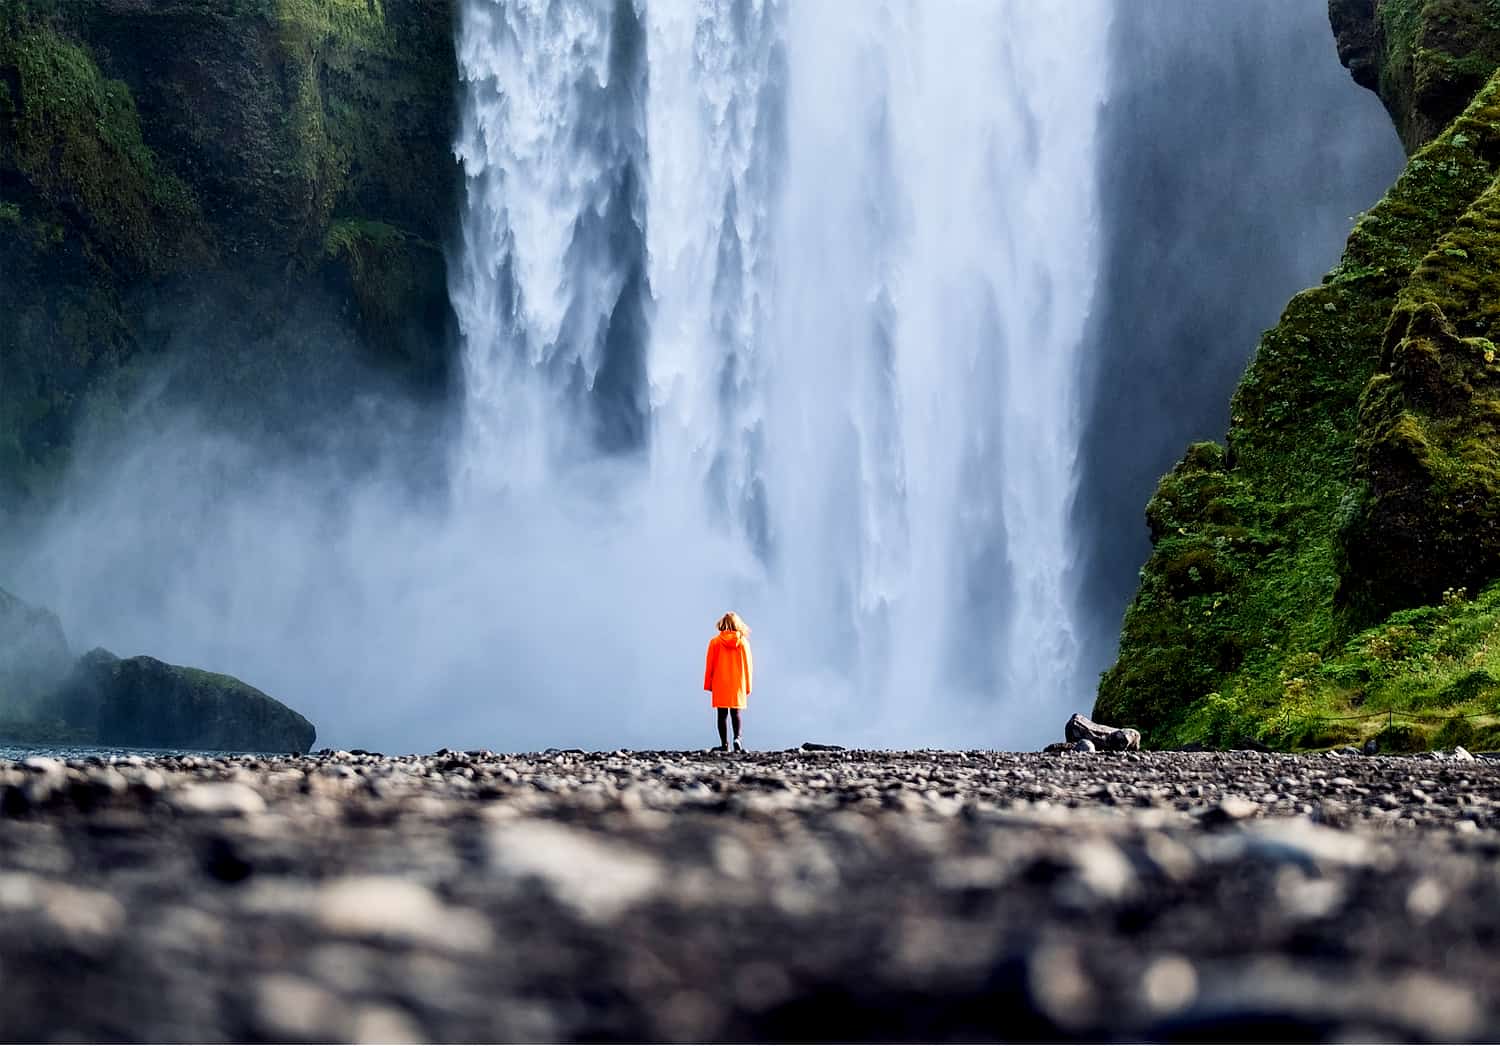 Photo taken at ground level looking towards a woman in an orange jacket standing in front of the base of a large waterfall.